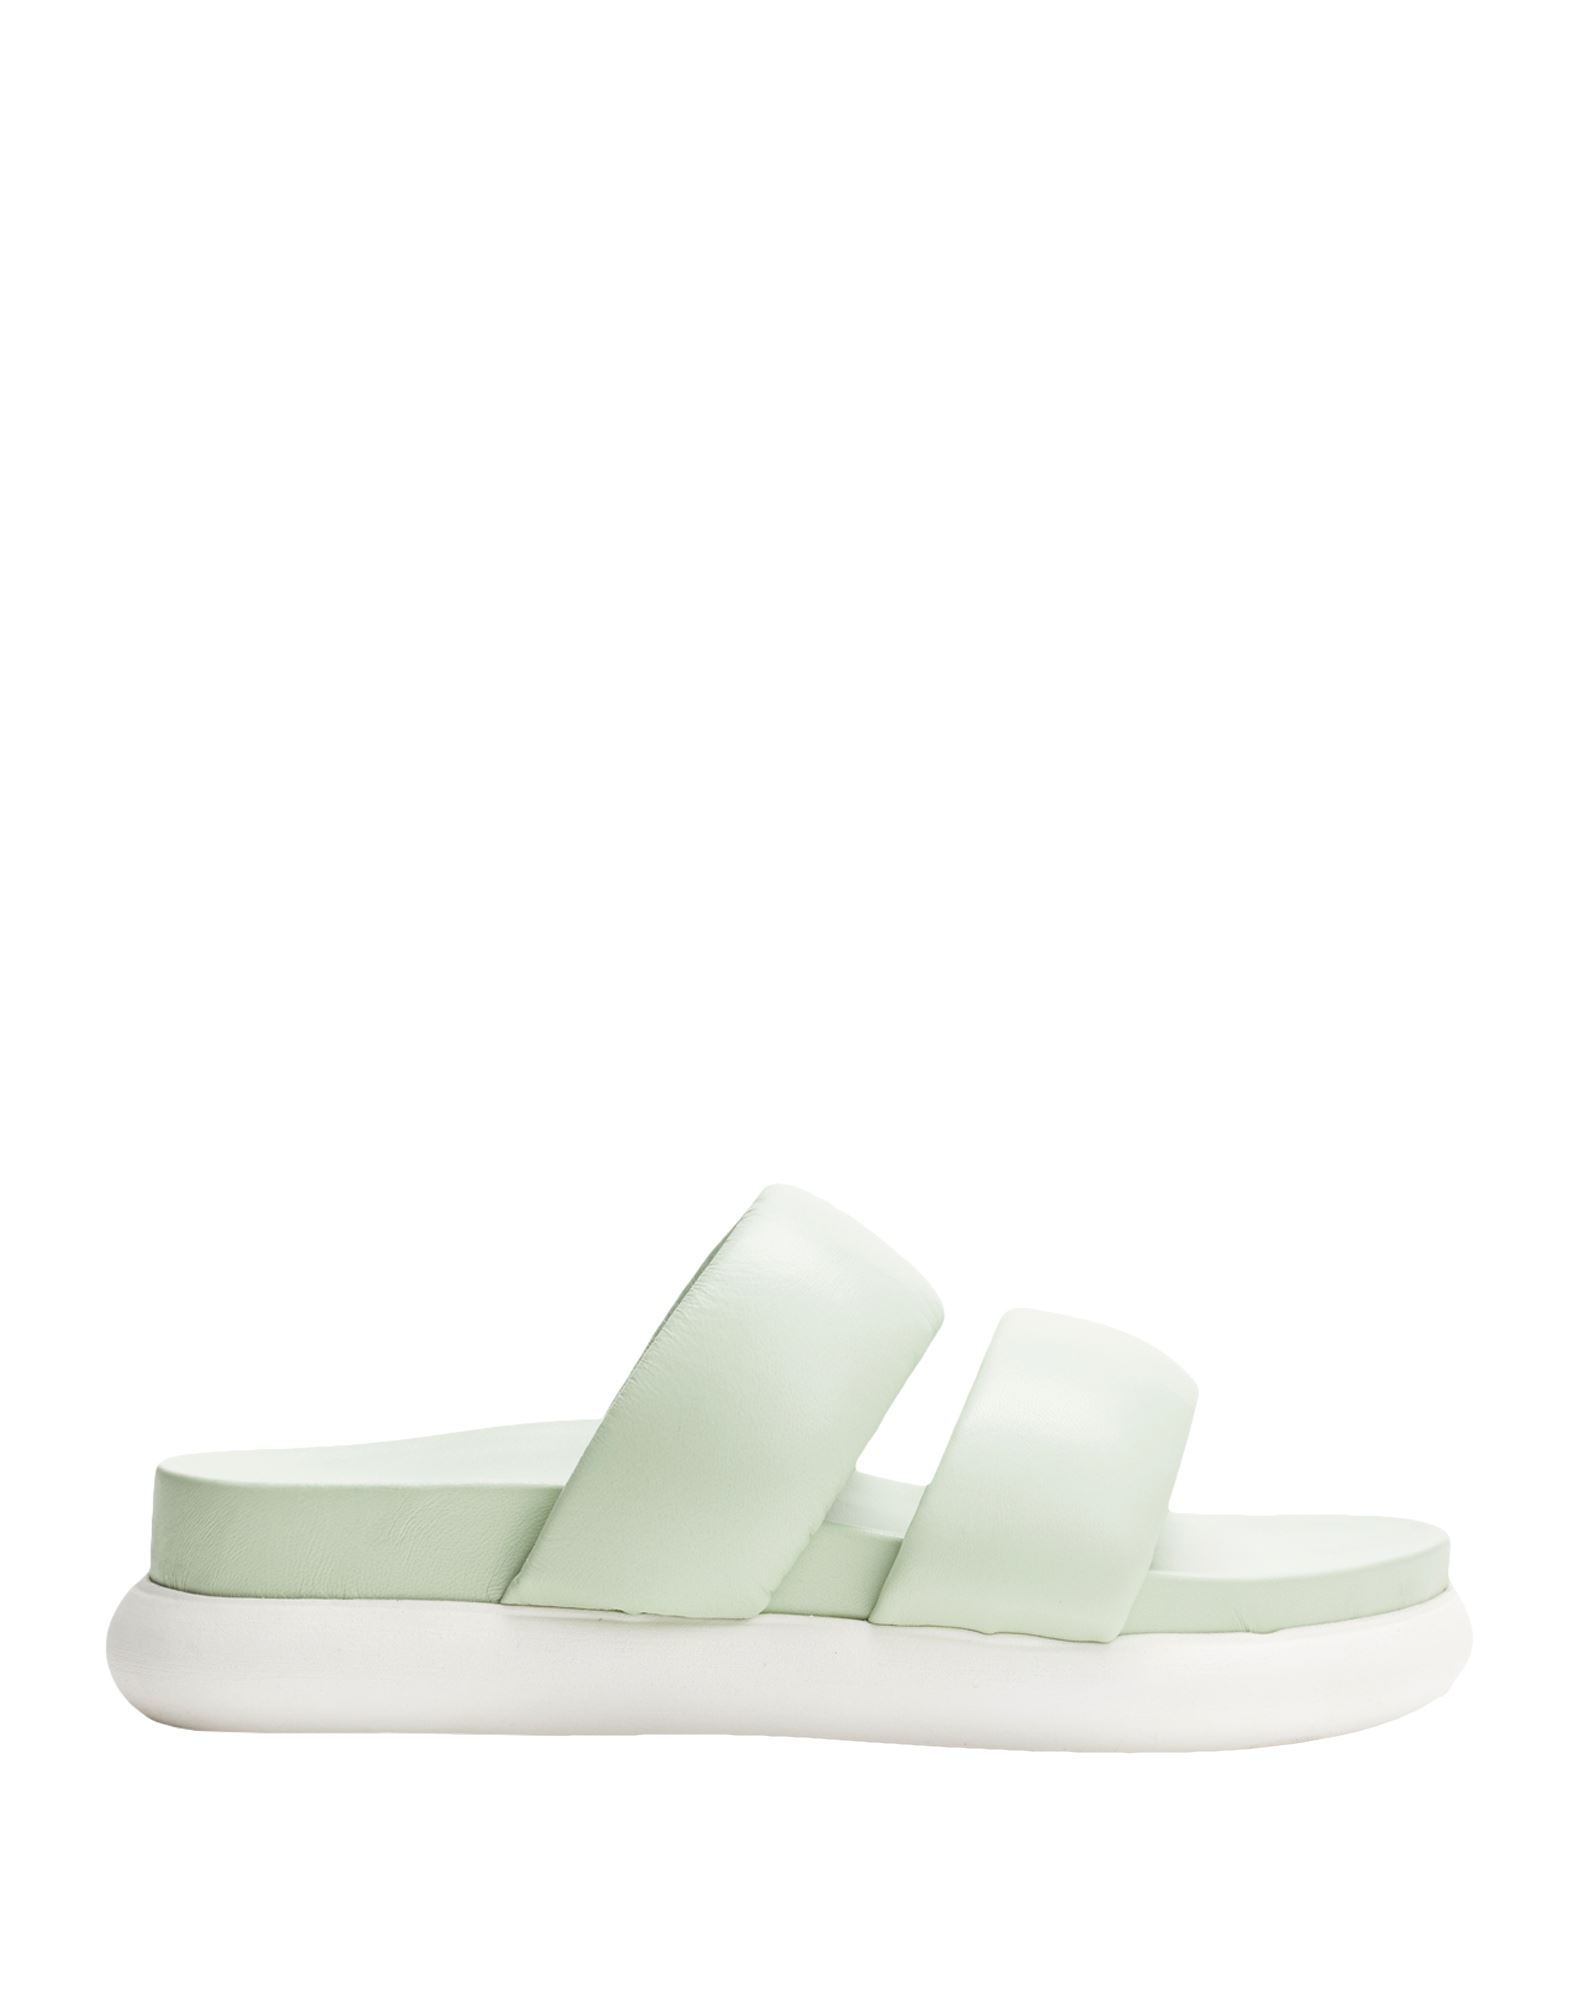 8 By Yoox Sandals In Green